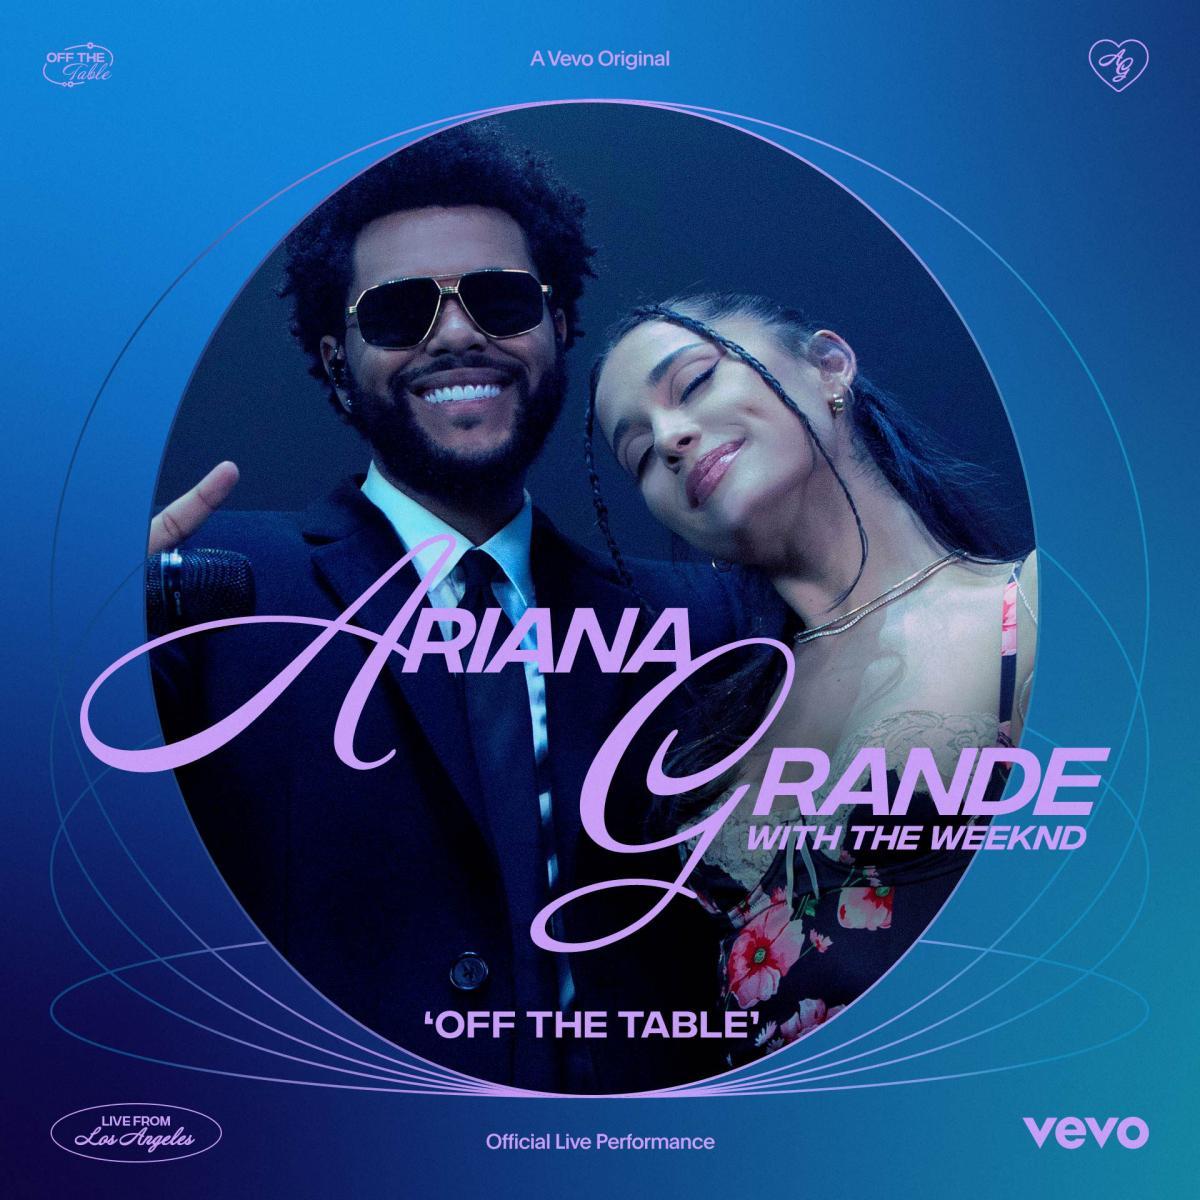 Die For You (Remix), Ariana Grande Wiki